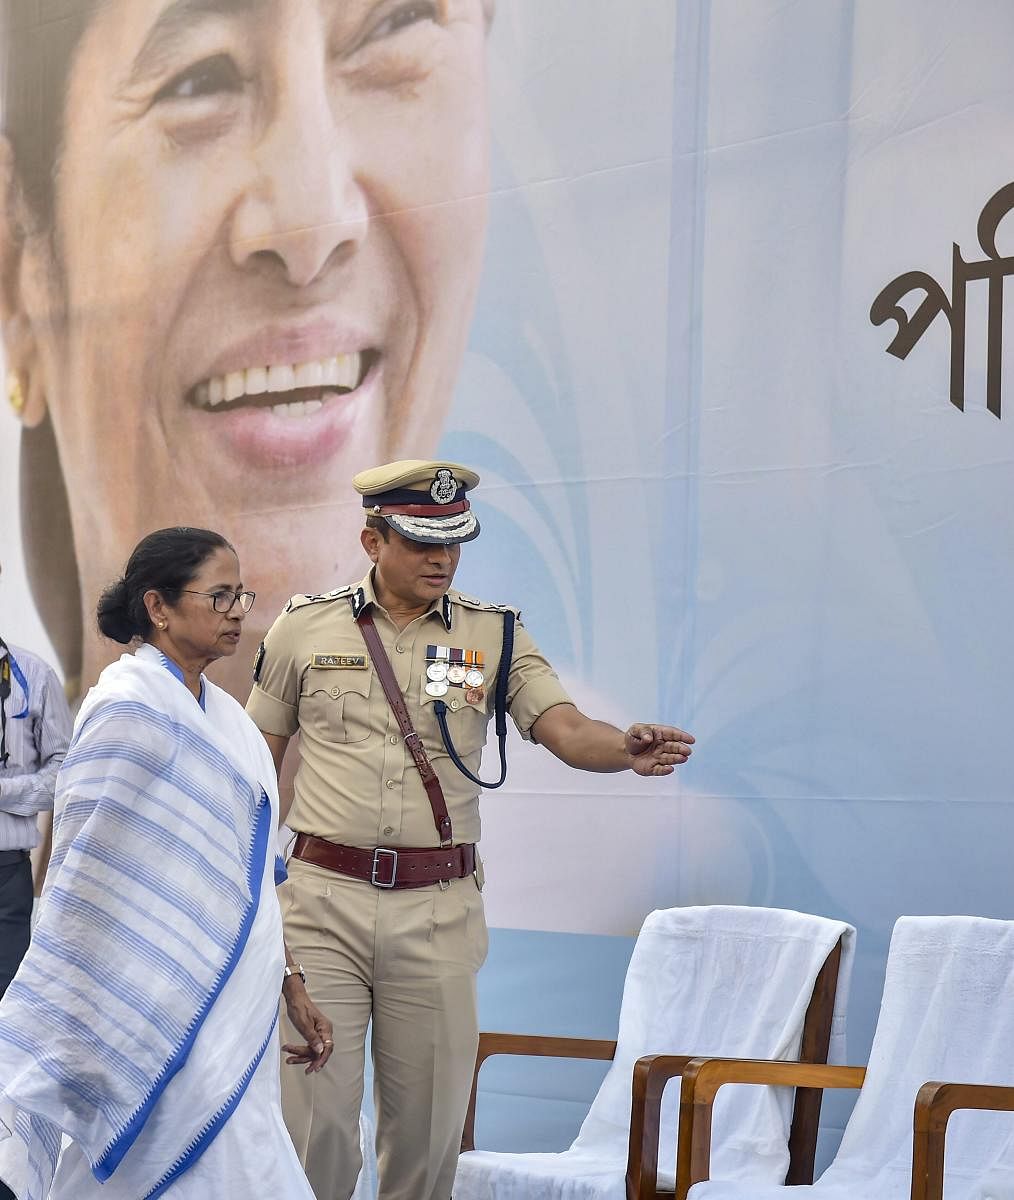 West Bengal CM Mamata Banerjee with Kolkata Police Commissioner Rajeev Kumar during the Joint Investiture Ceremony of West Bengal Police and Kolkata Police, in Kolkata, on February 4, 2019. PTI